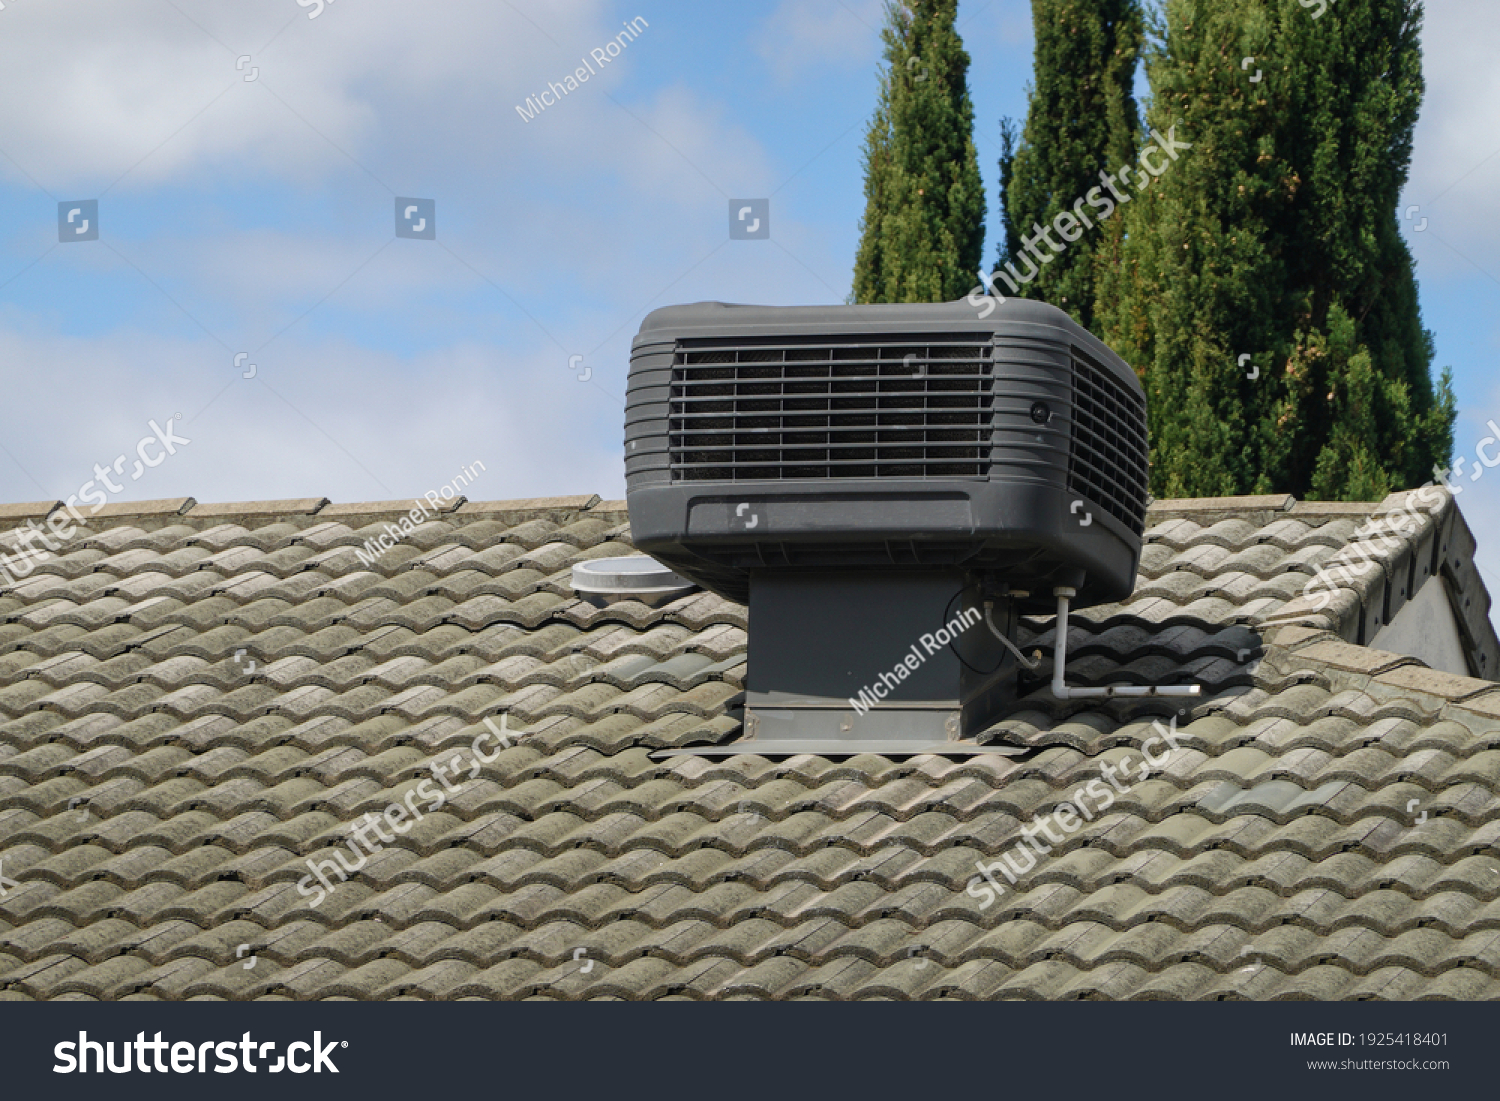 Older Style Evaporative Cooler on Roof of House #1925418401